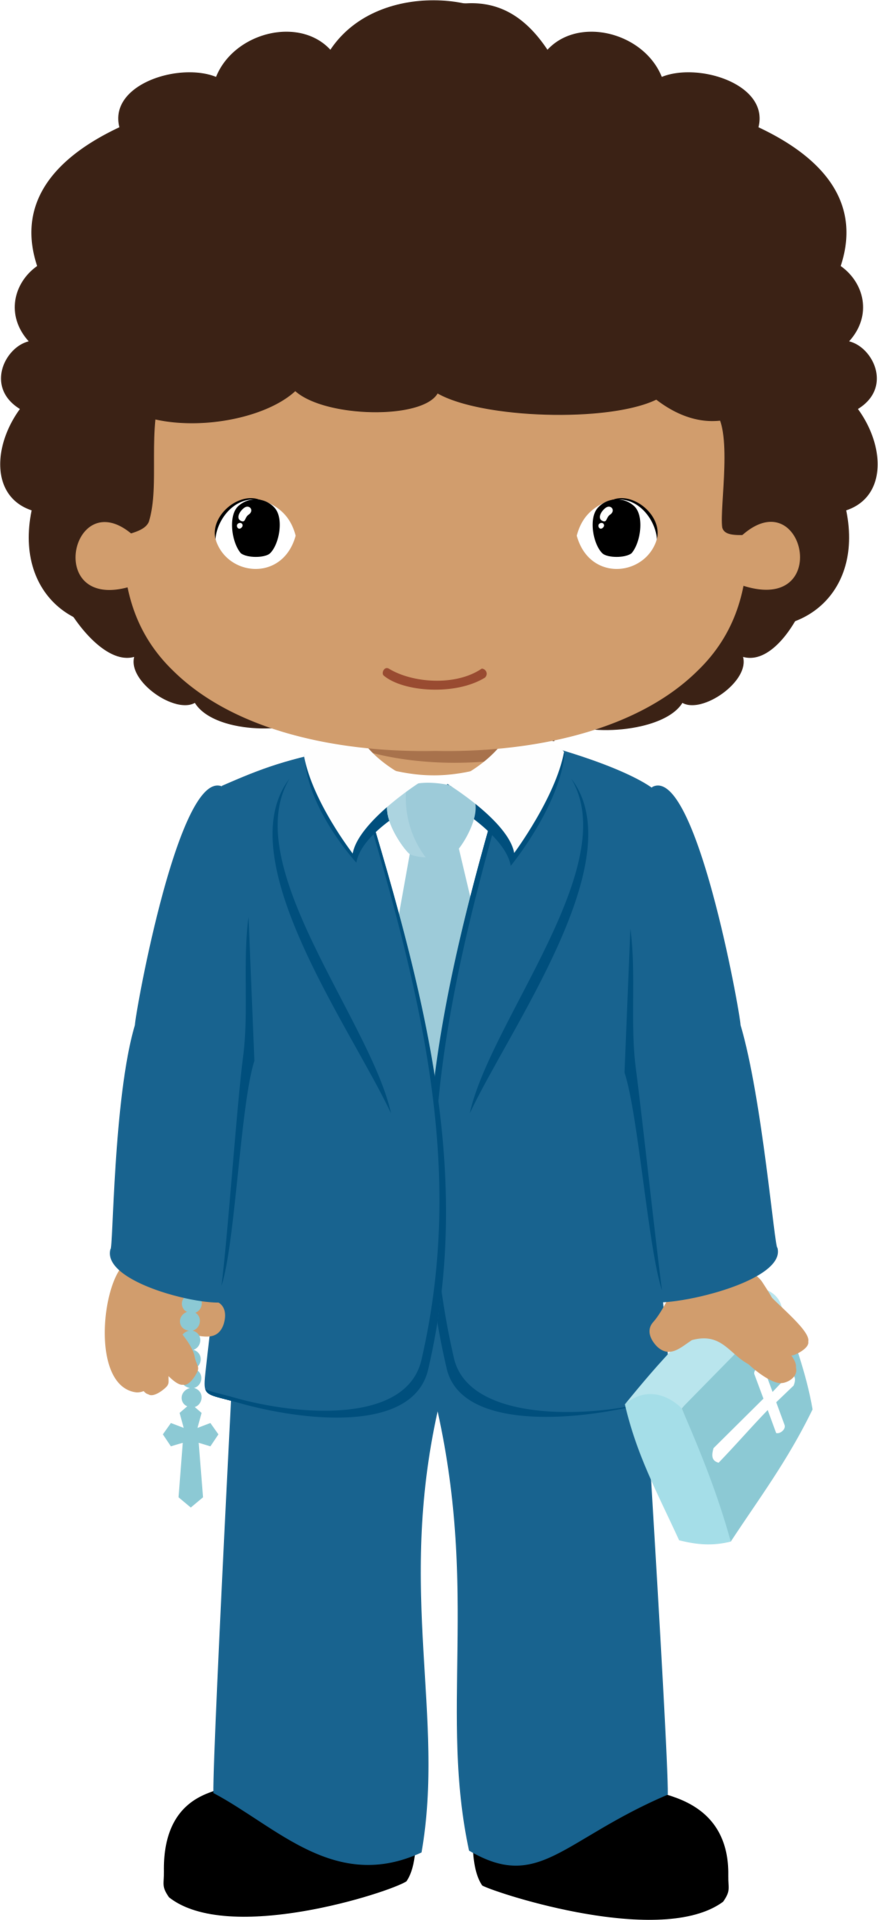 View All Images At Png Folder - Clip Art Communion Boy Png (878x1920)